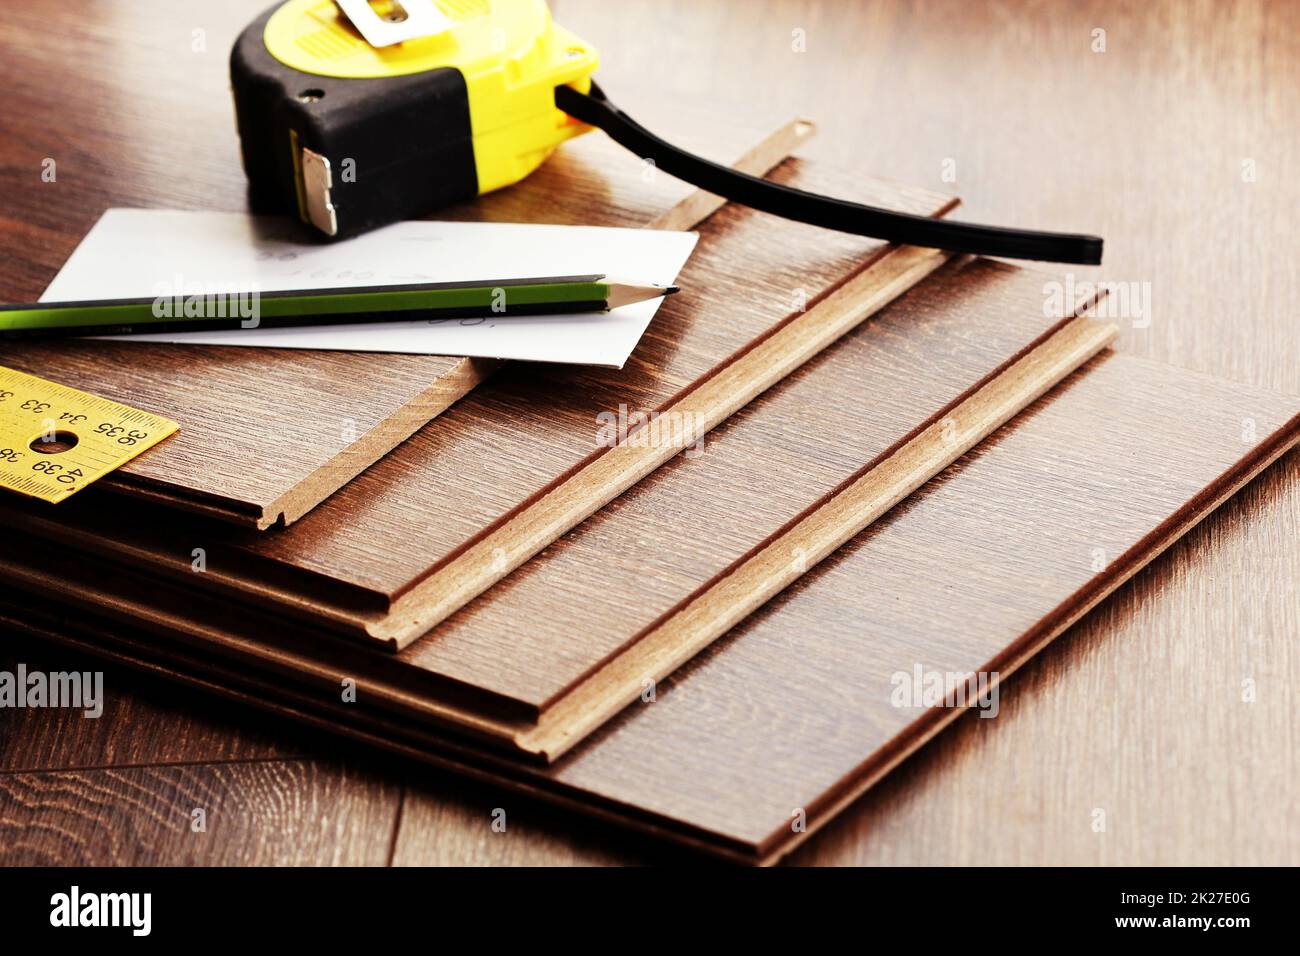 Laminate floor planks and tools on wooden background Stock Photo